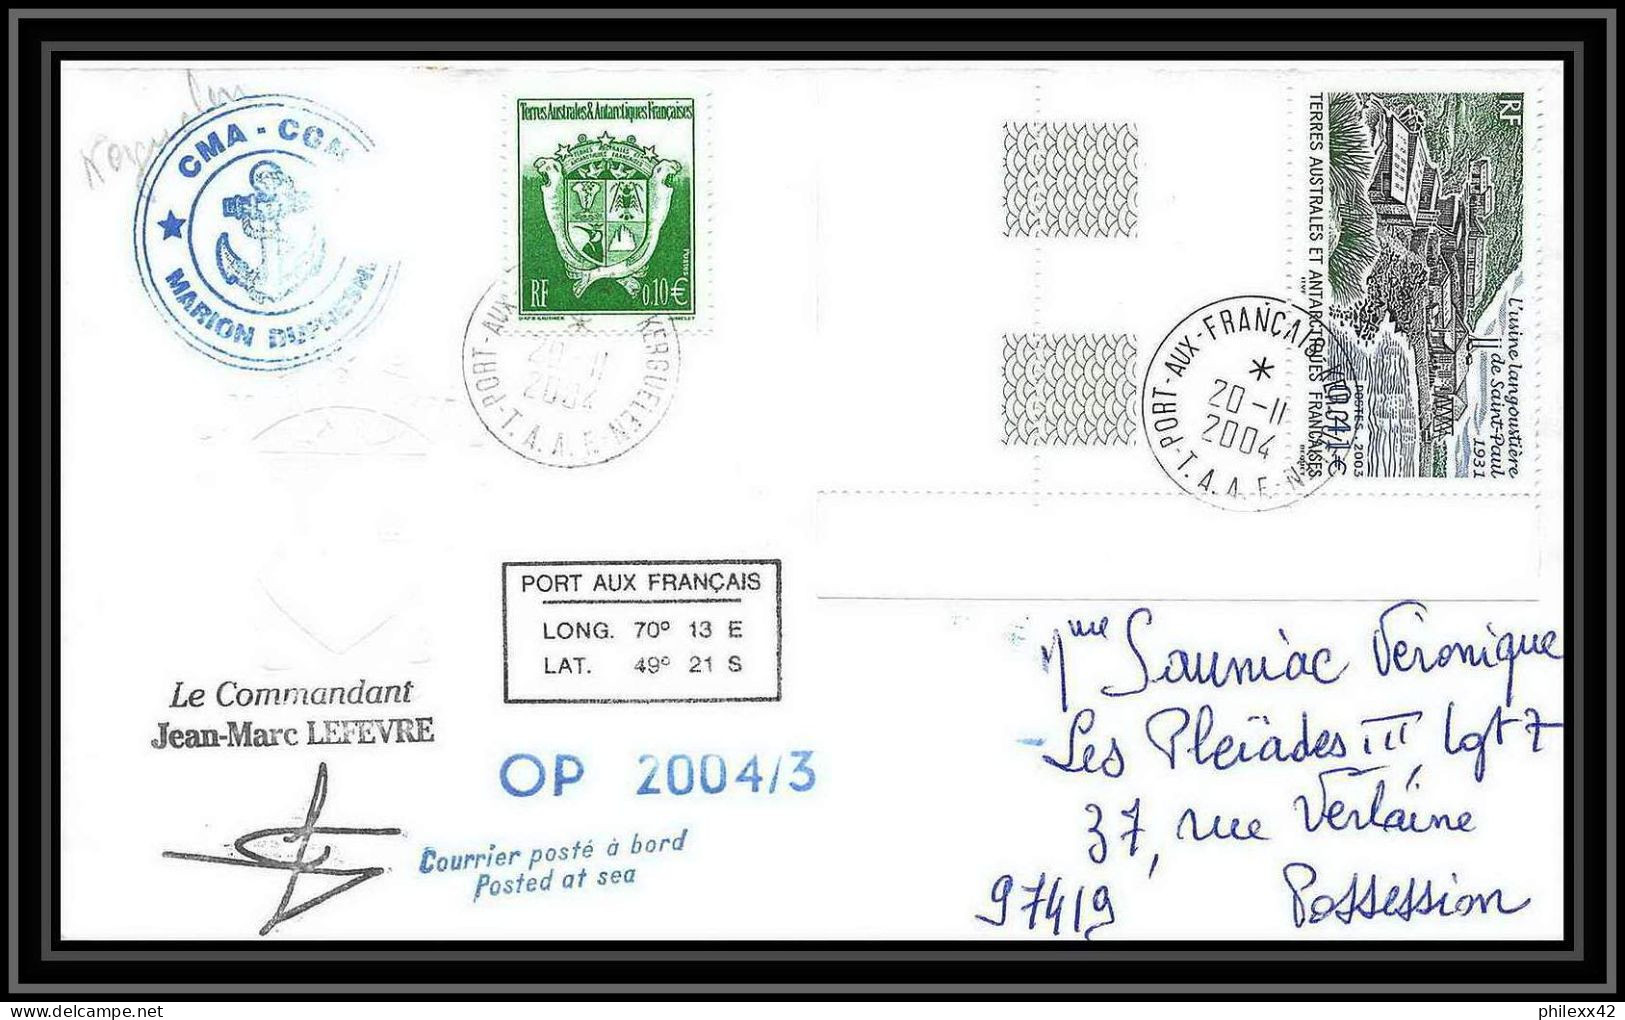 2472 ANTARCTIC Terres Australes TAAF Lettre Cover Dufresne 2 Signé Signed OP 2004/3 20/11/2004 N°349 Helilagon - Helicópteros